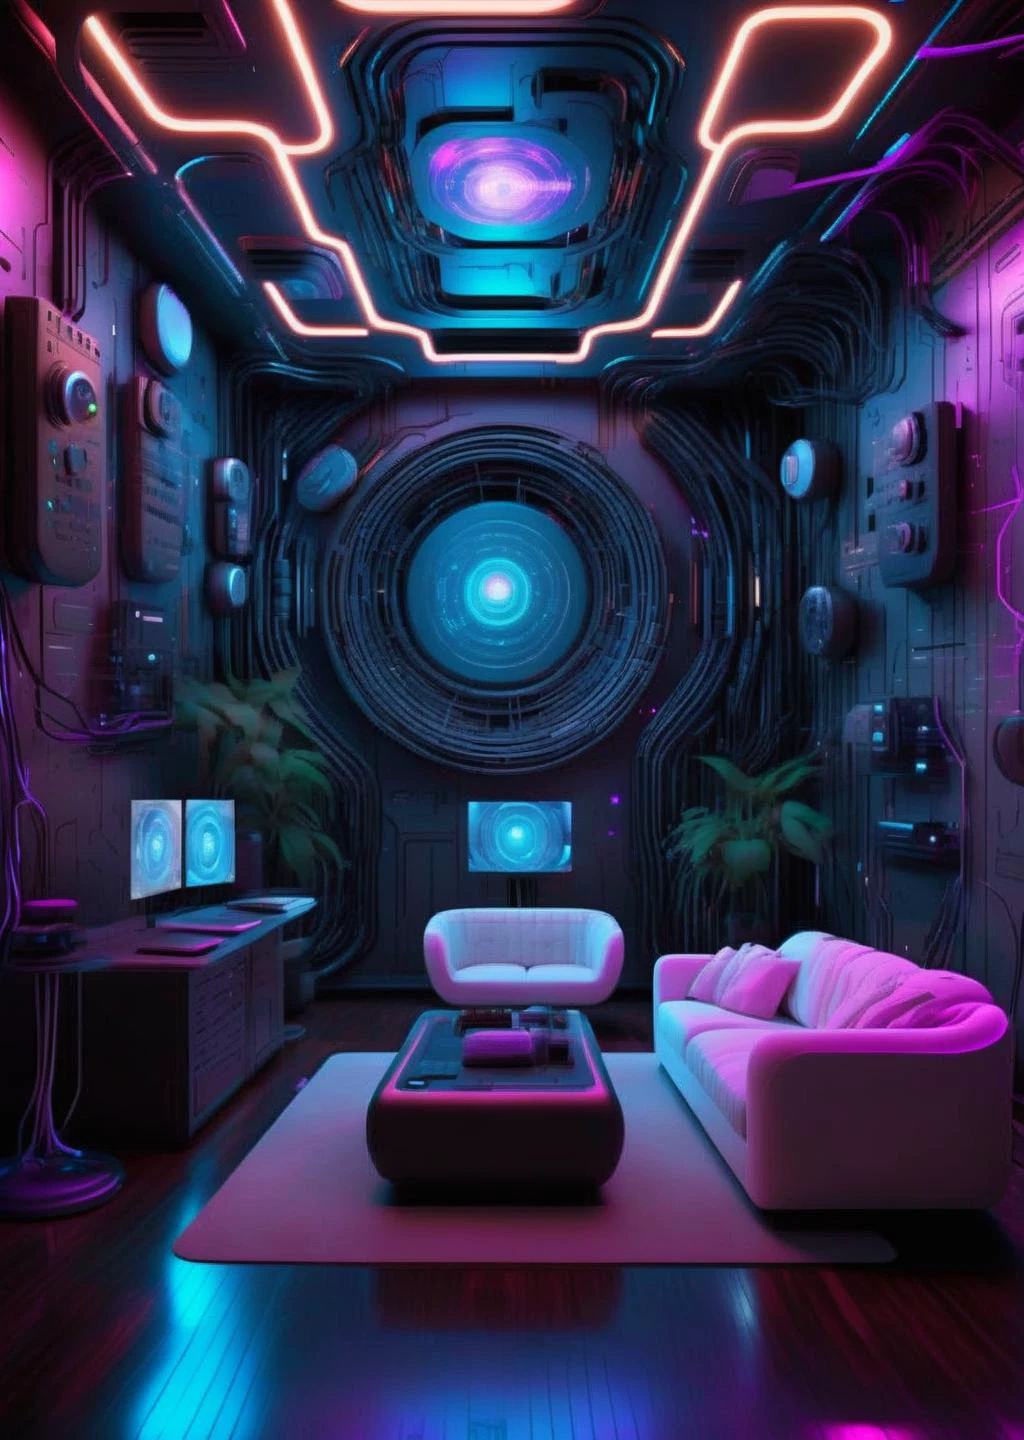 ((magazine photography)) , Brainwave lounge, neural resonators, meditative pods, synaptic harmonics, immersive neural soundscapes, transcendental experiences in data-encoded tranquility. ,  cgstudio, computer graphics, space art , cyberpunk ambient, a room